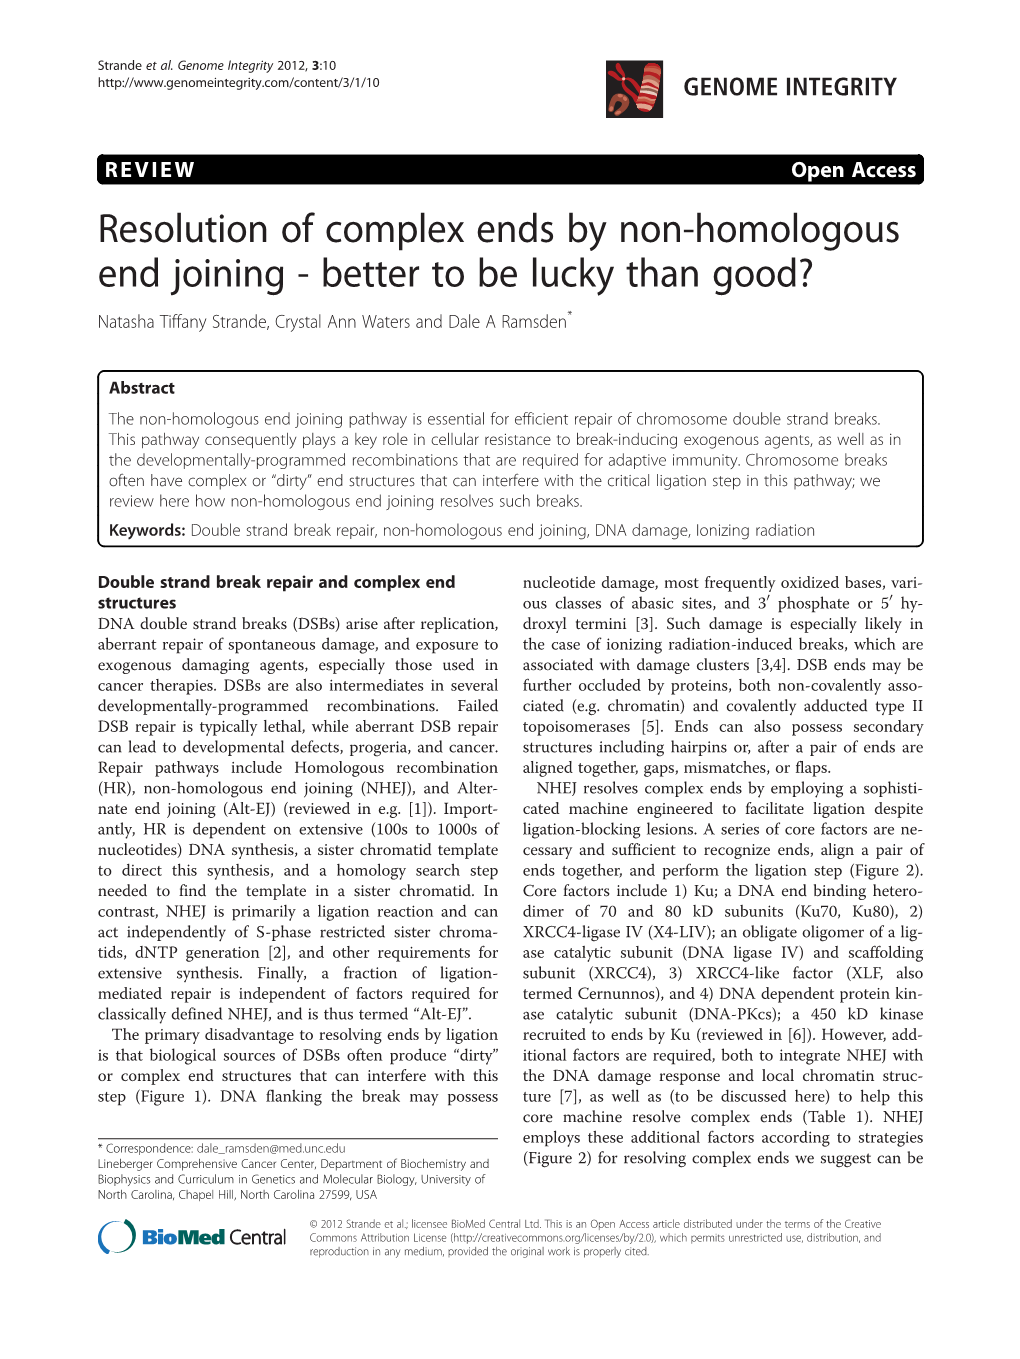 Resolution of Complex Ends by Non-Homologous End Joining - Better to Be Lucky Than Good? Natasha Tiffany Strande, Crystal Ann Waters and Dale a Ramsden*